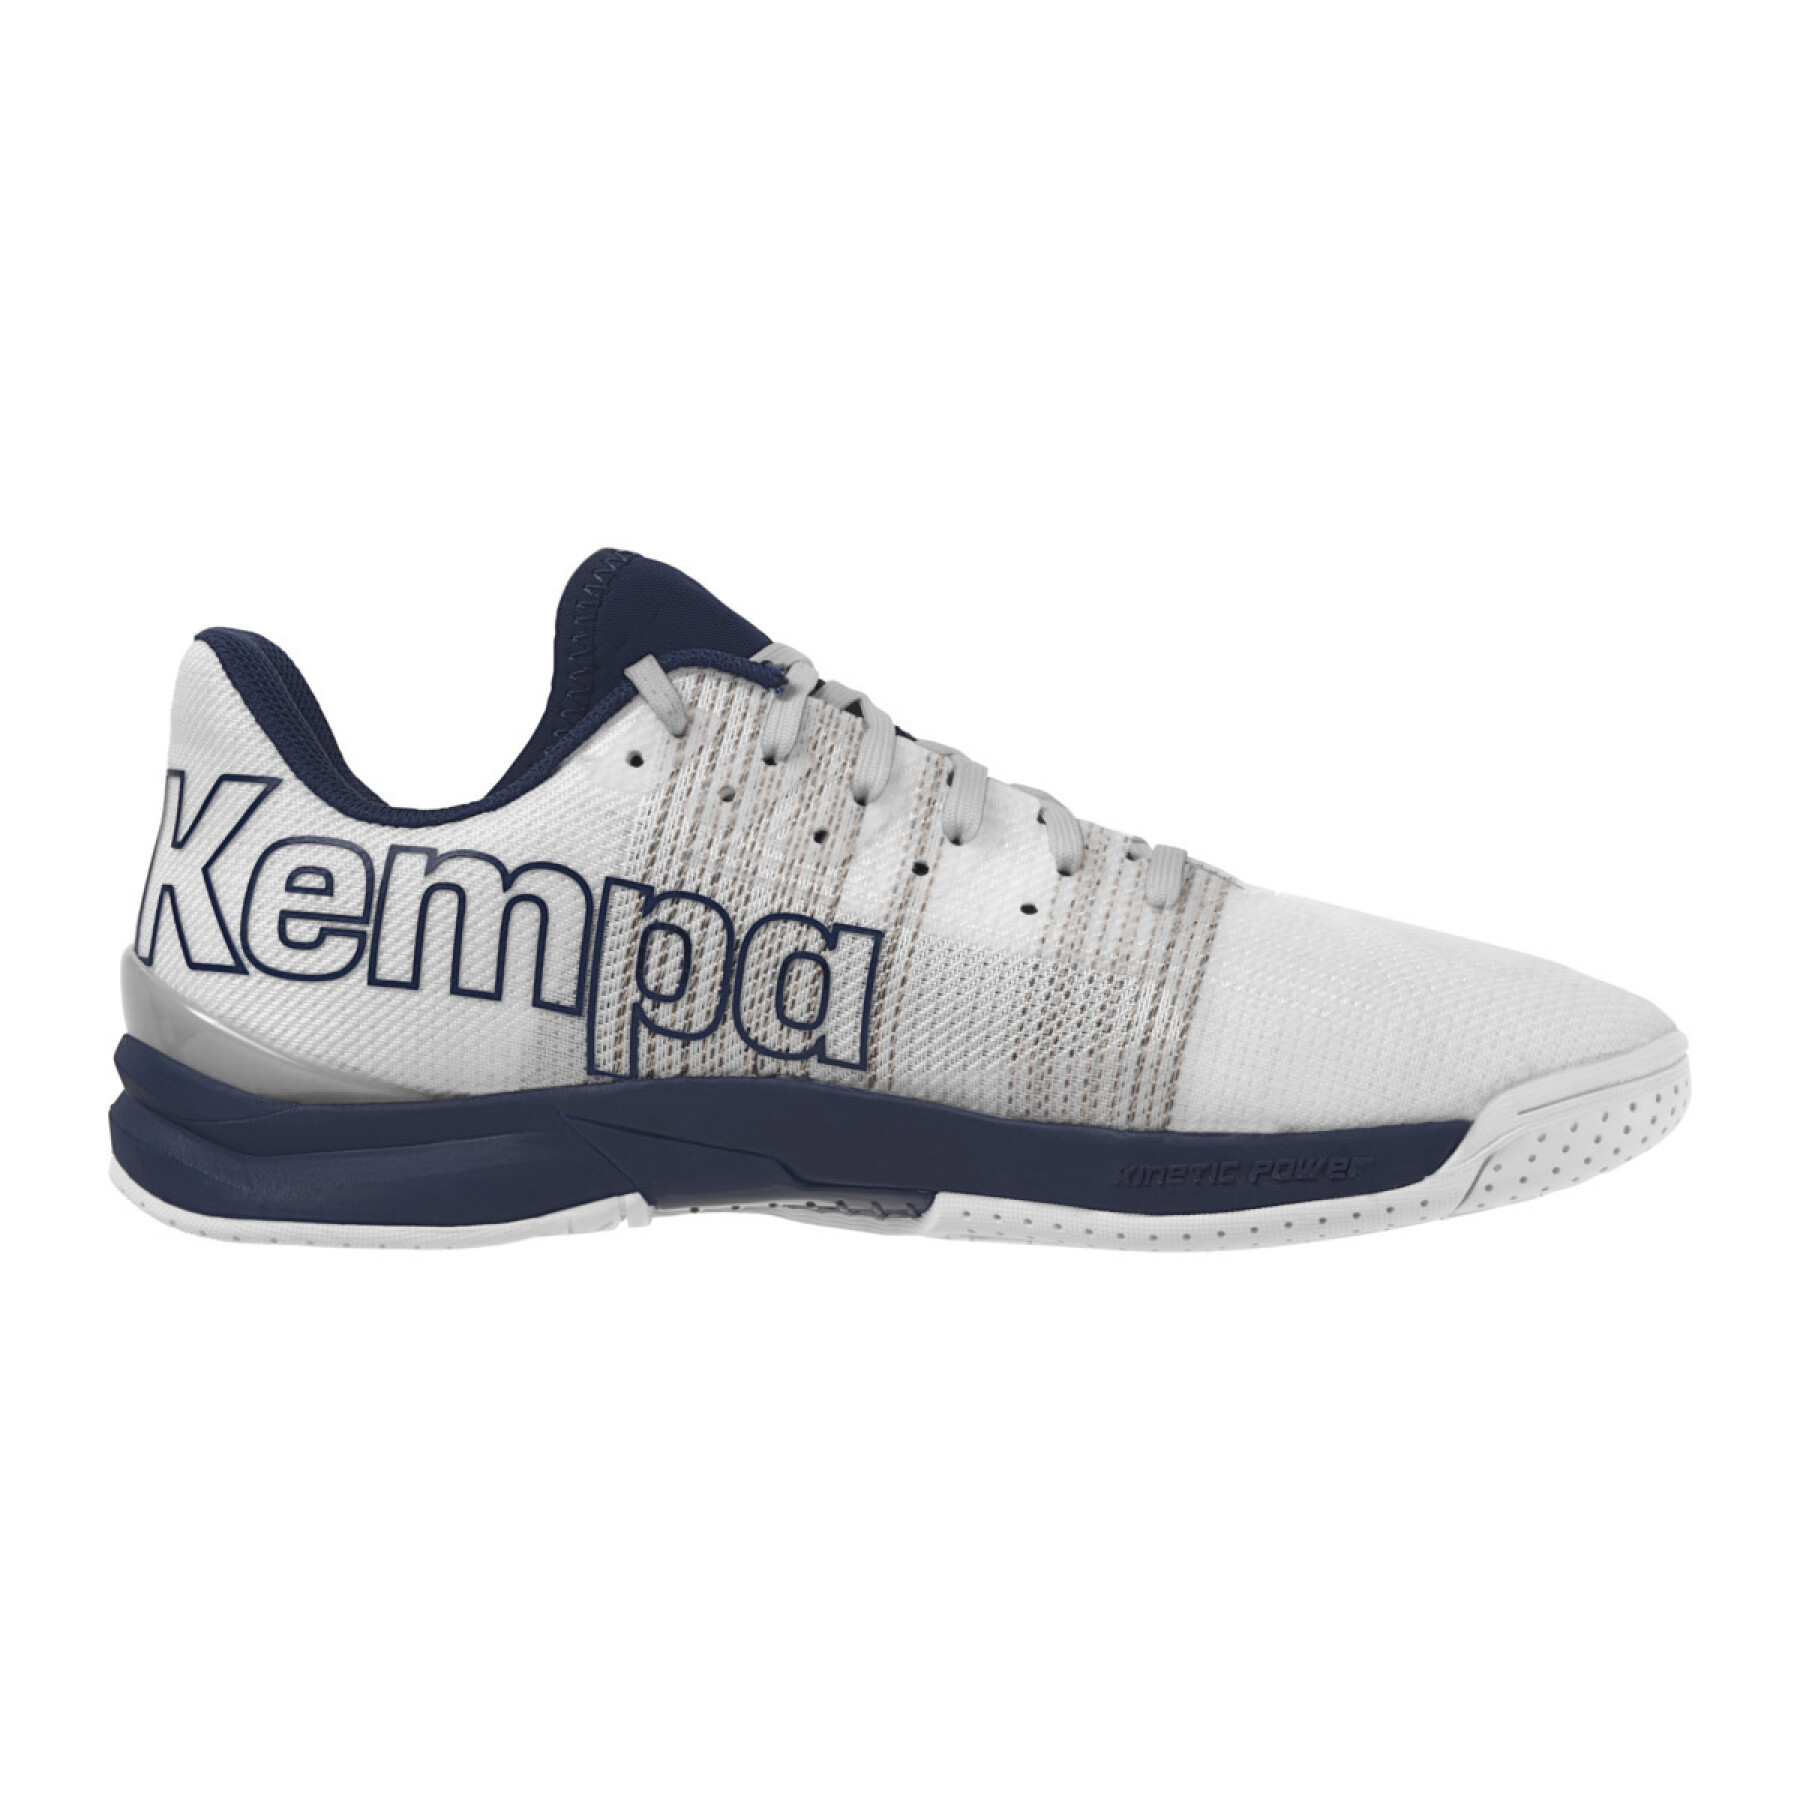 Hallenschuhe Kempa Attack One 2.0 Game Changer